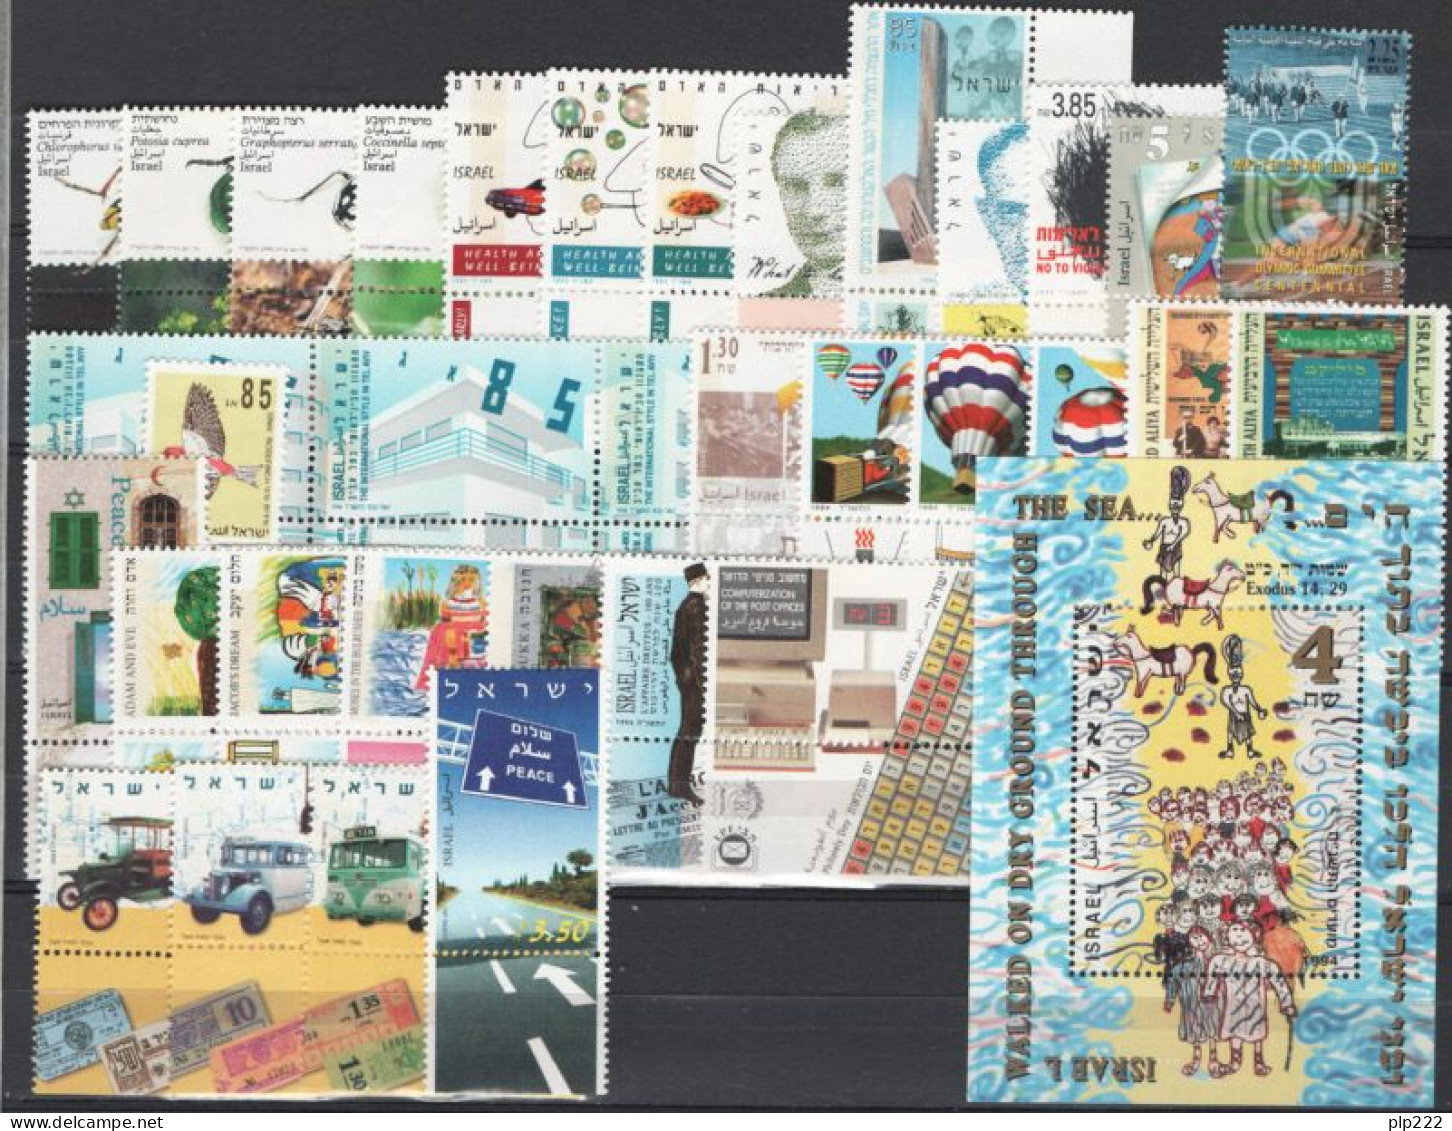 Israele 1994 Annata Completa Con Appendice / Complete Year Set With Tab **/MNH VF - Années Complètes